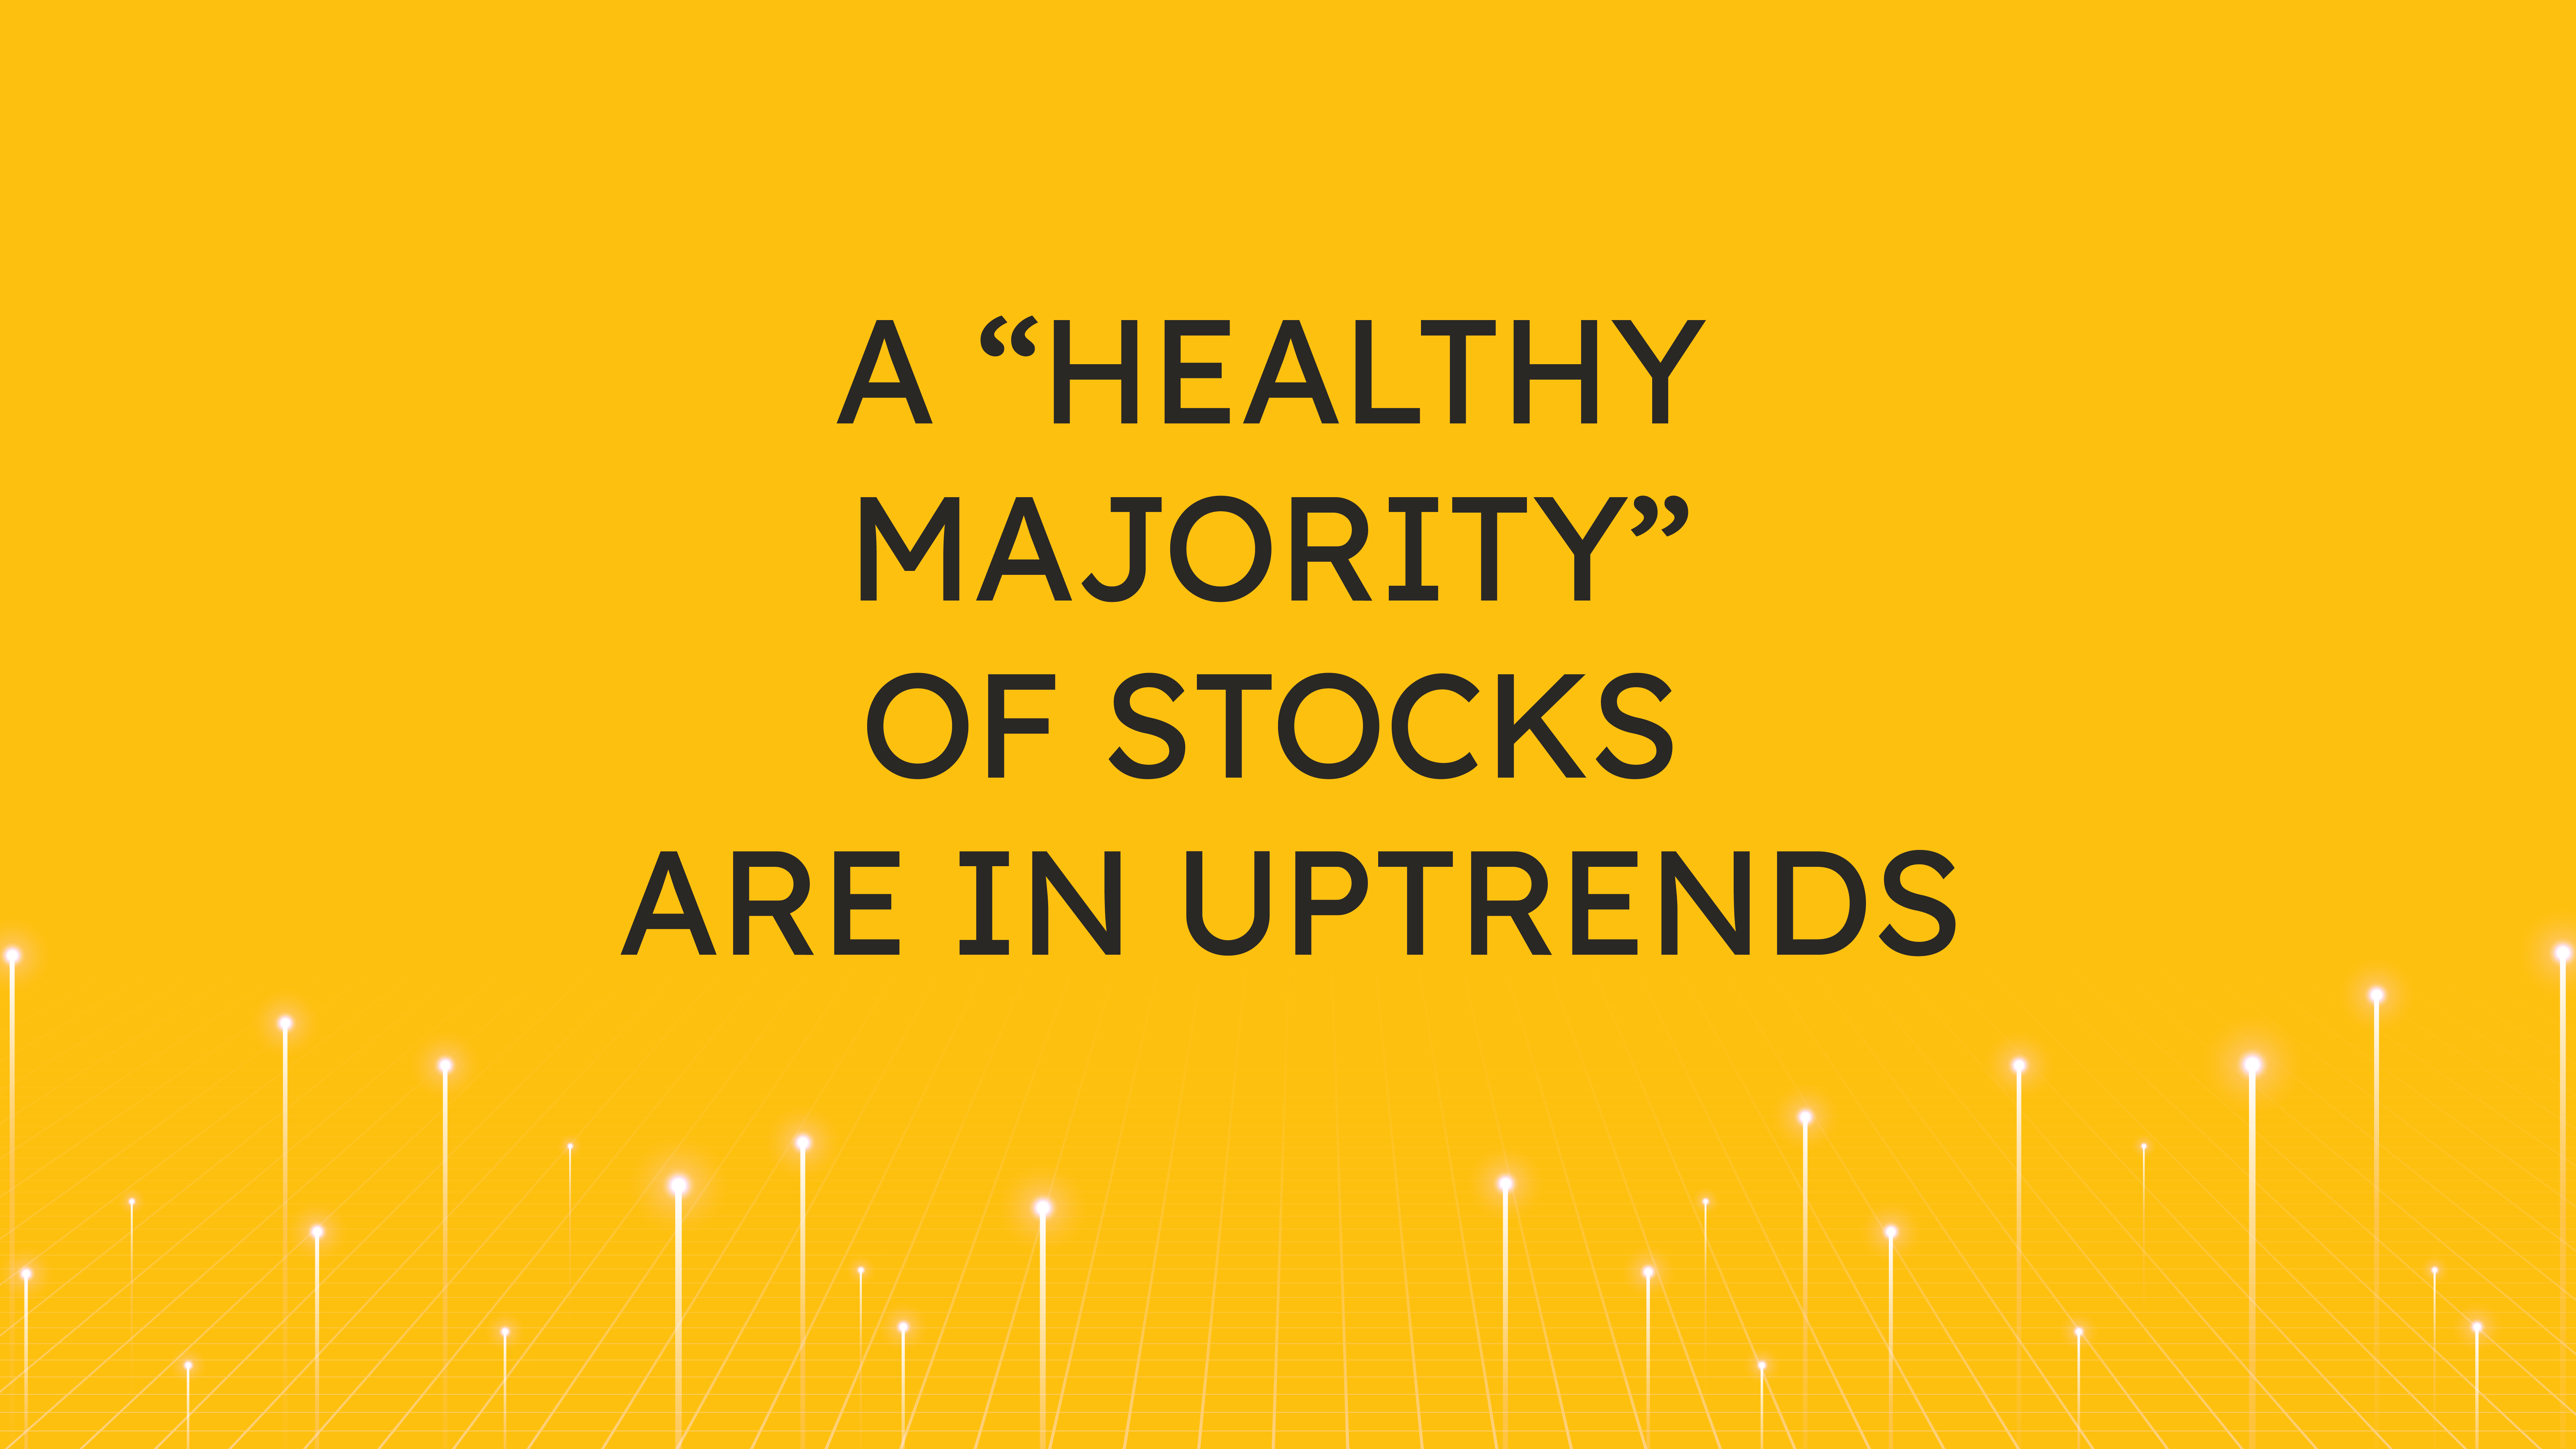 A “Healthy Majority” of Stocks  are in Uptrends